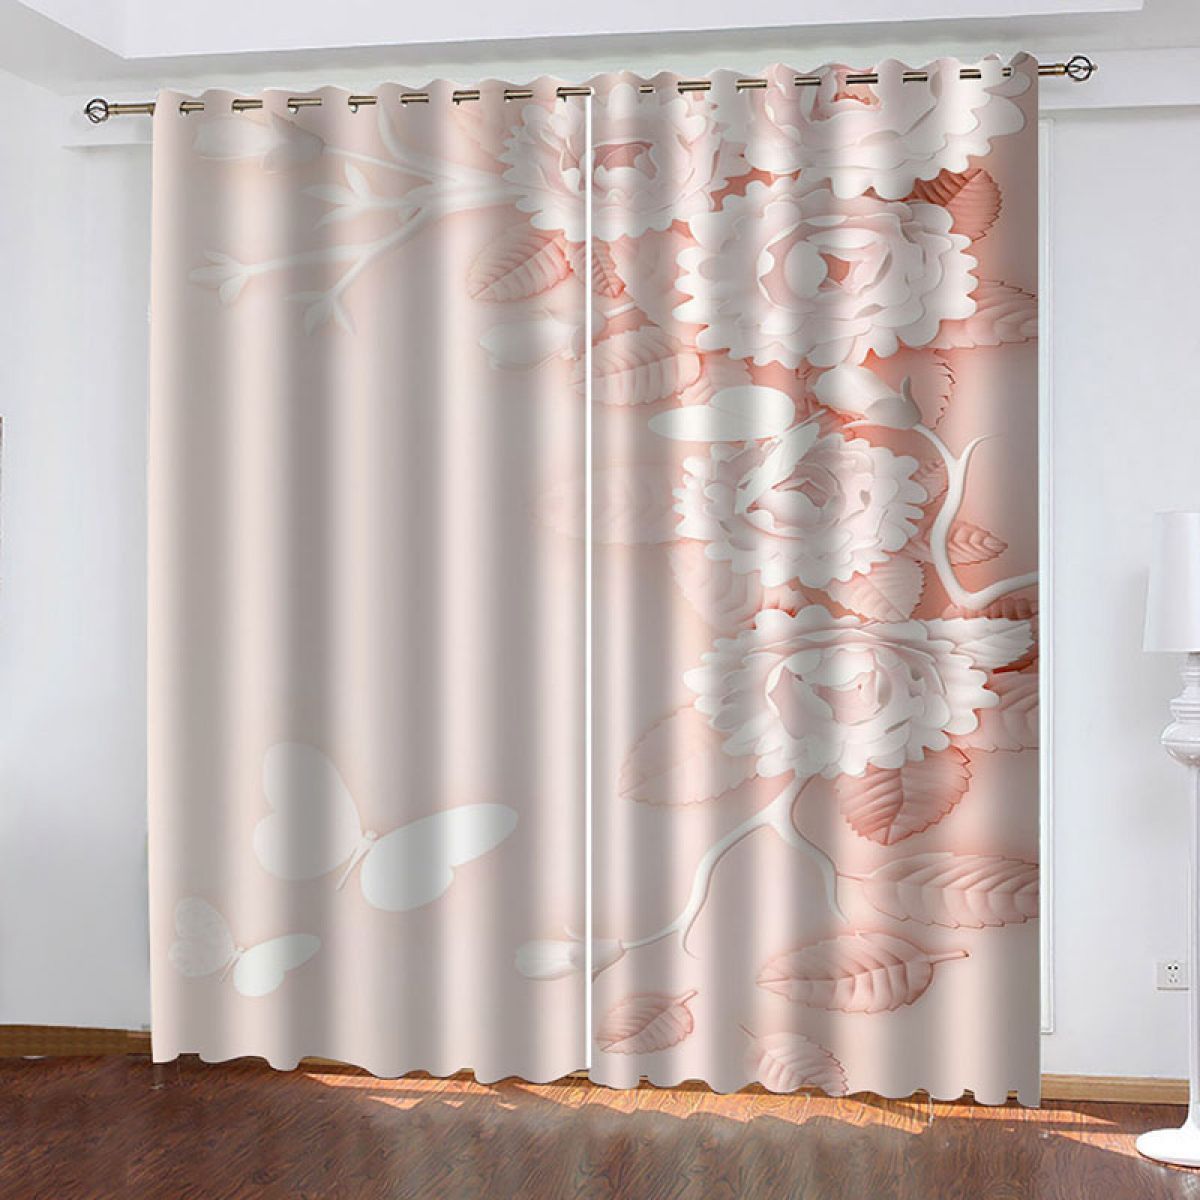 pink blossom life is beautiful printed window curtain home decor 1459